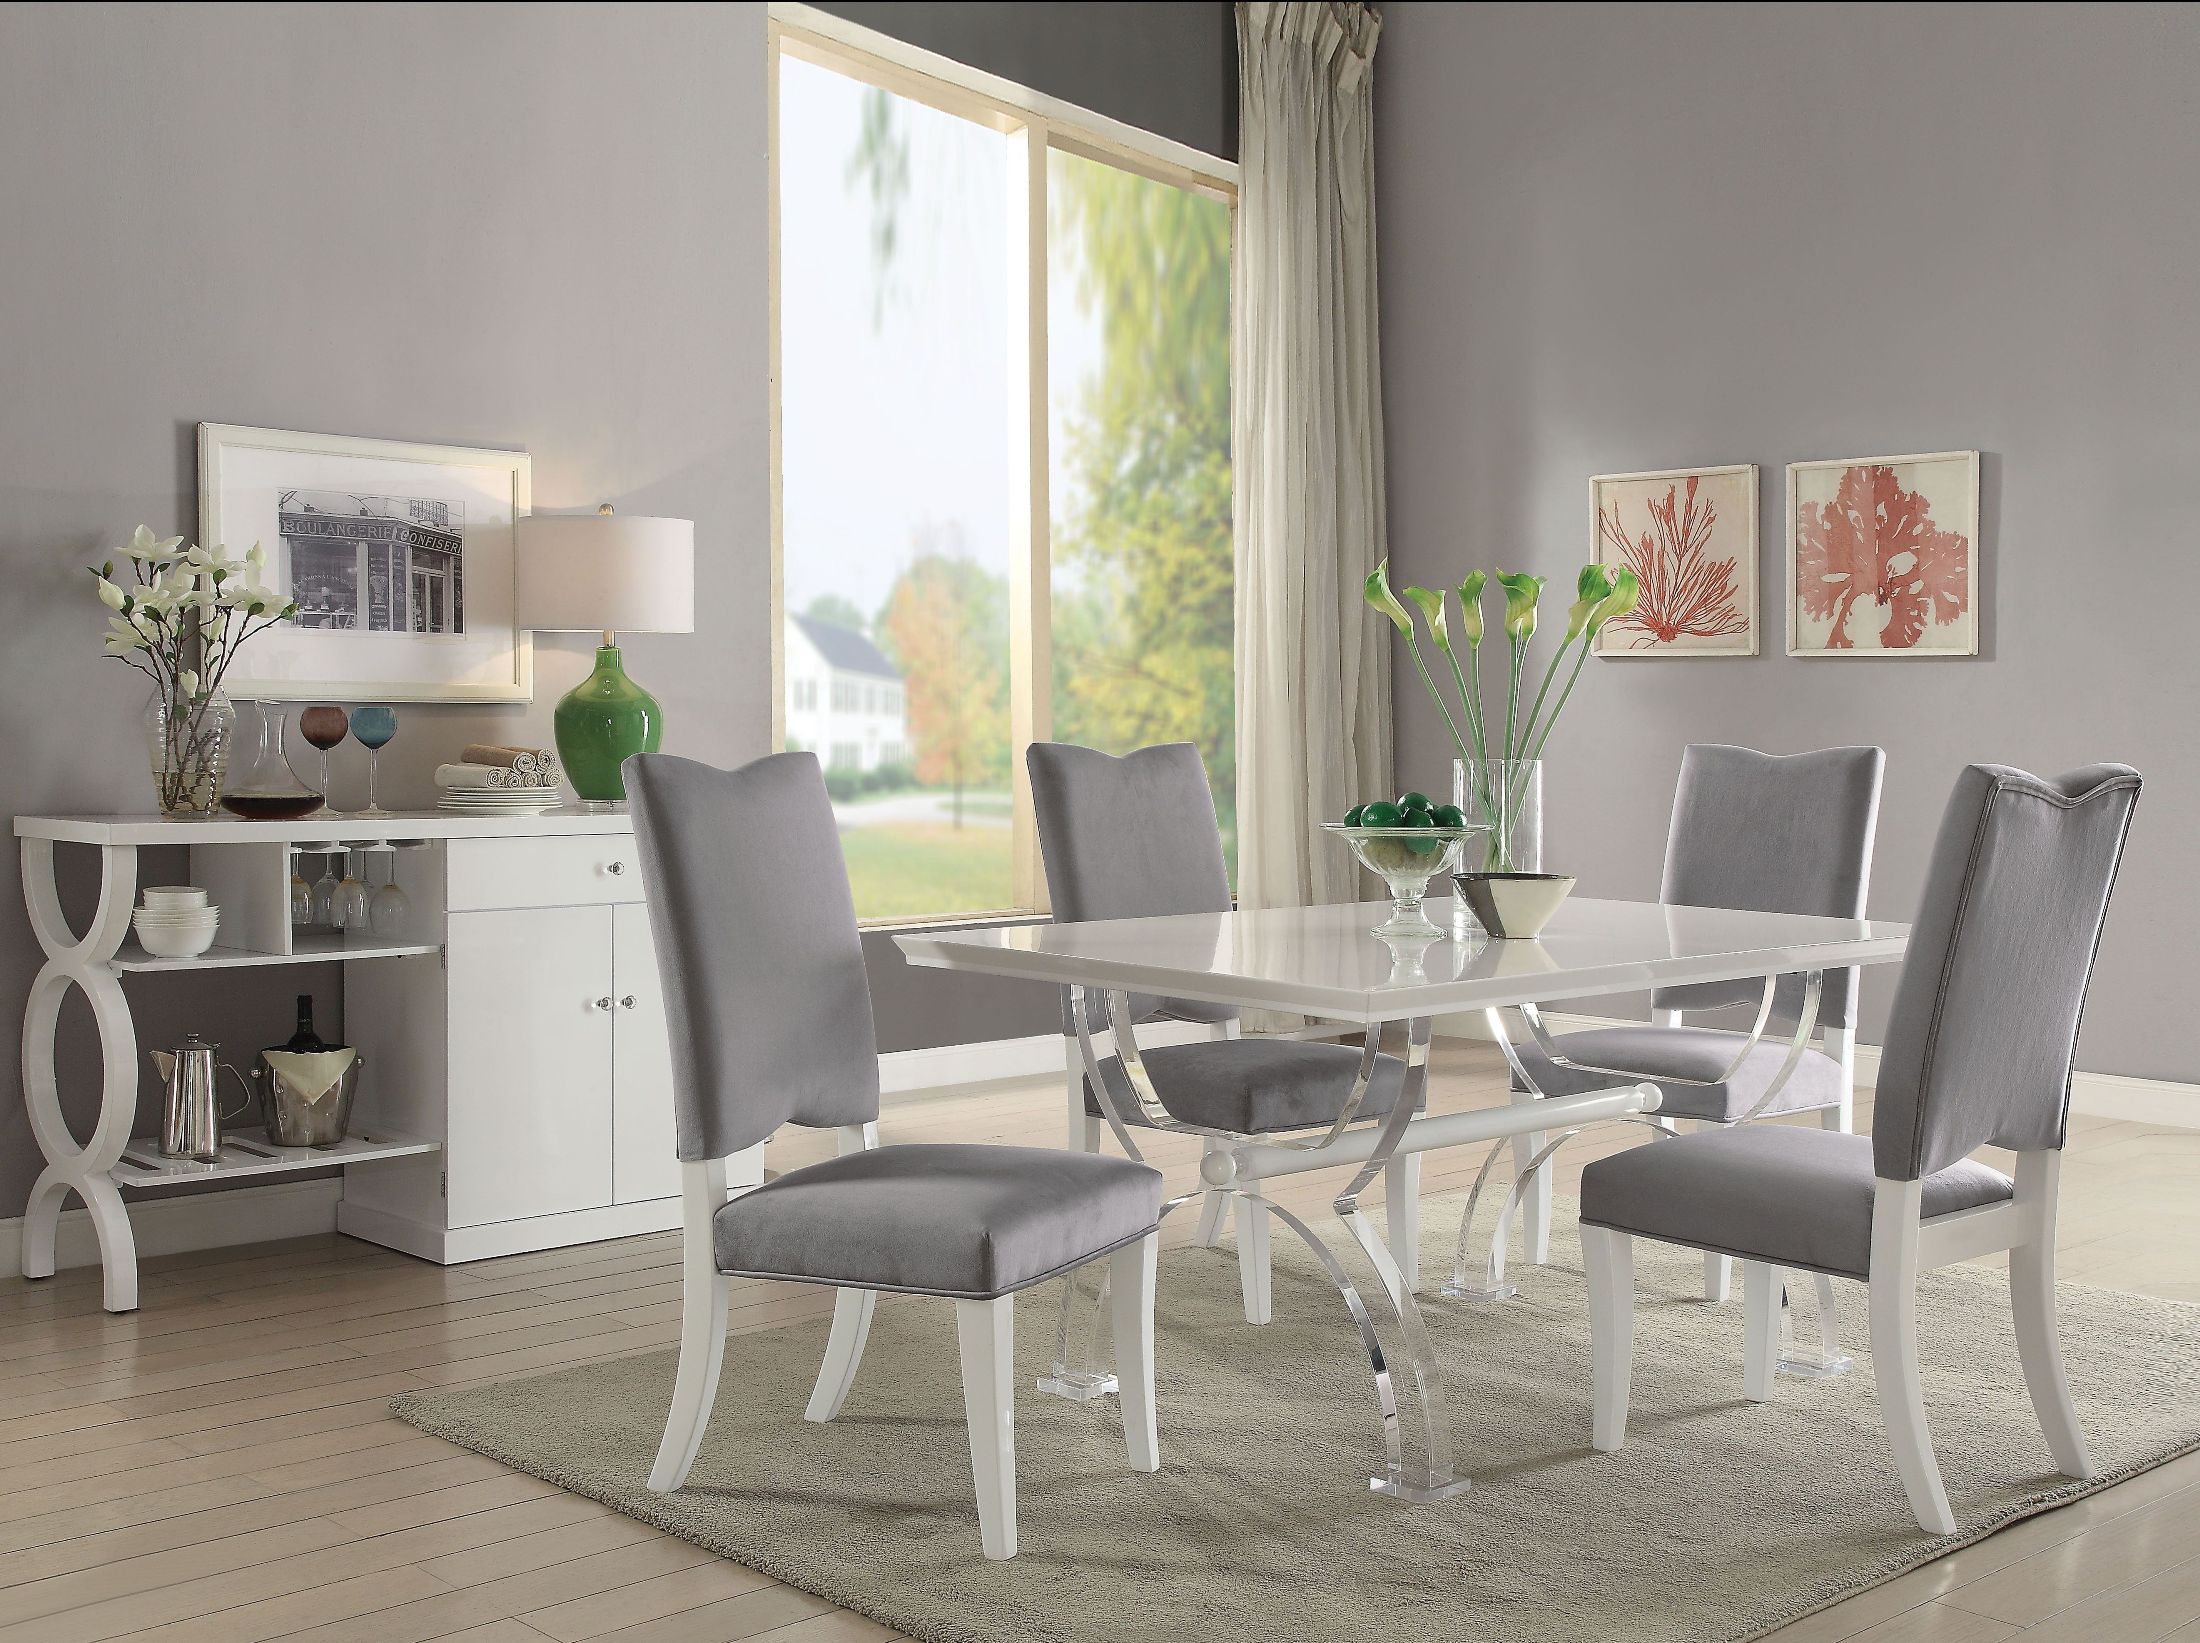 Acrylic Dining Room Set For Sale